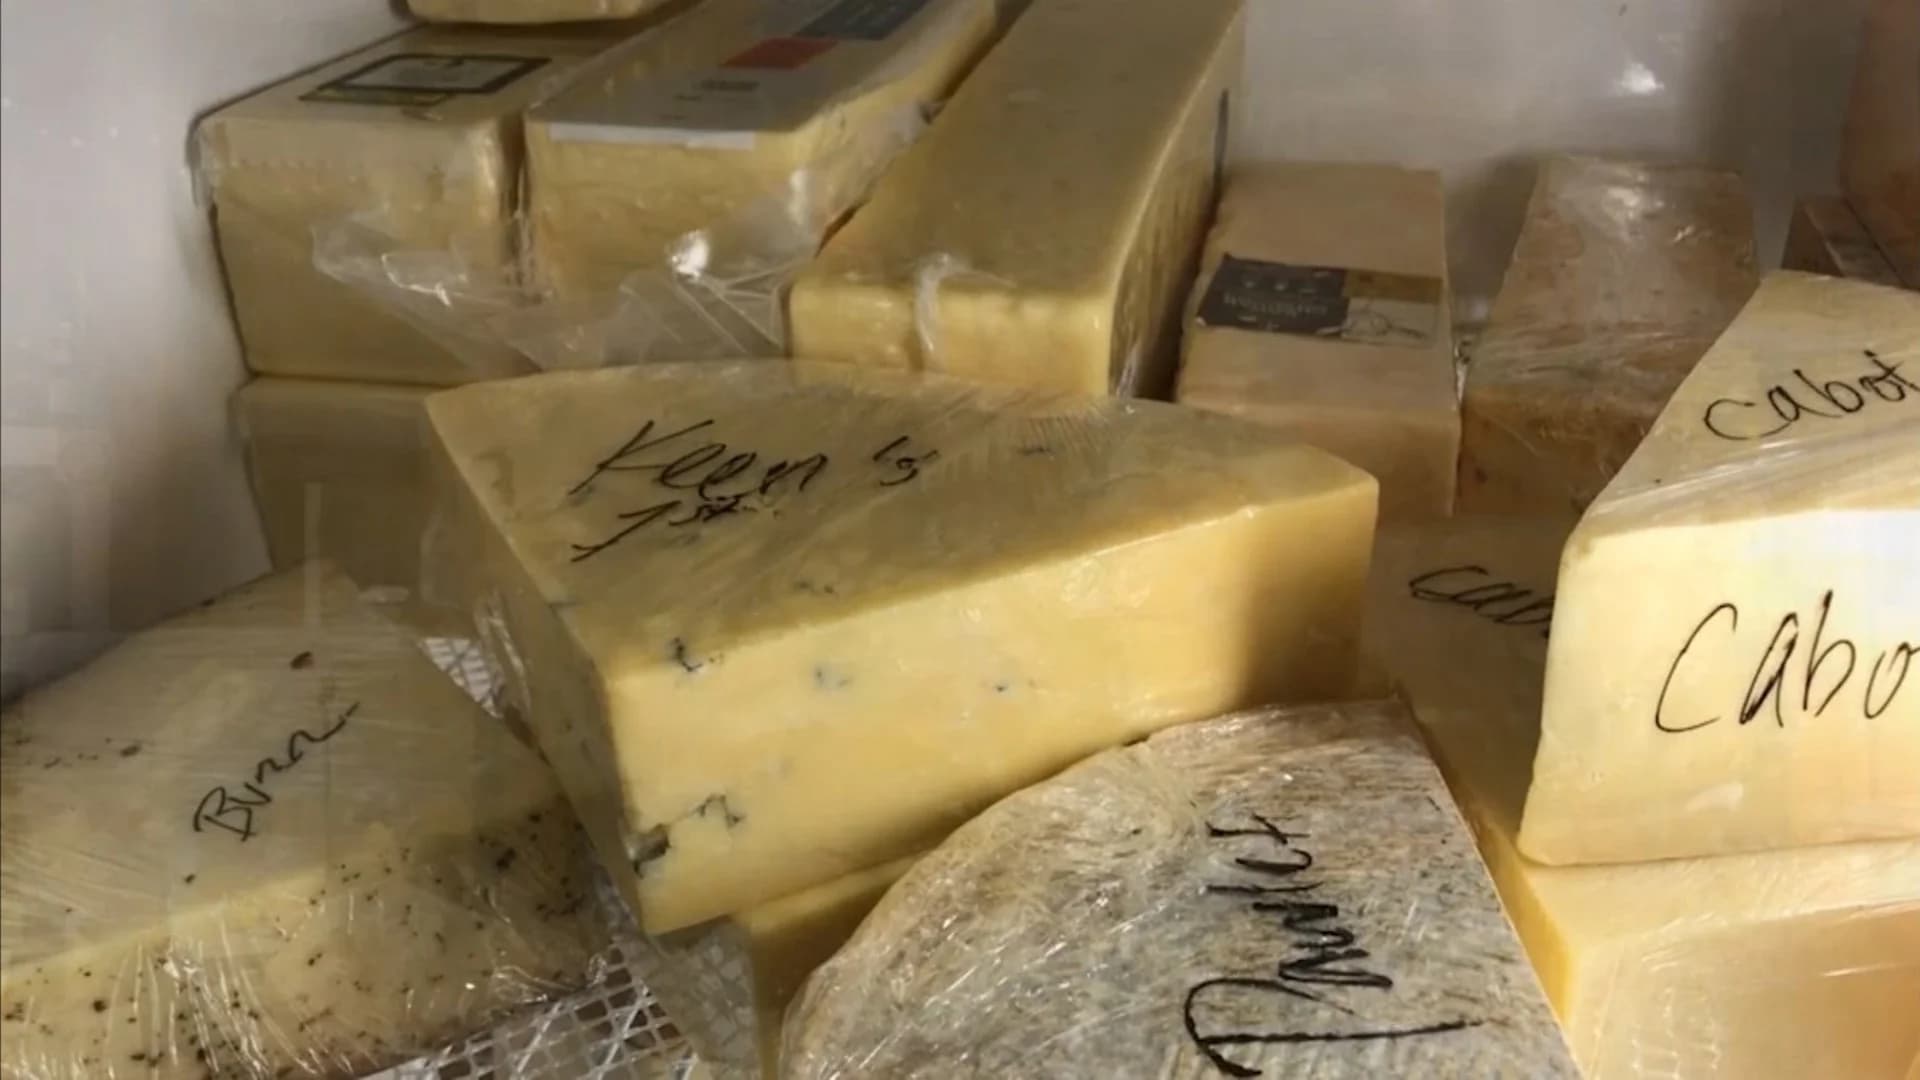 Report: America has 1.4 billion pounds of surplus cheese